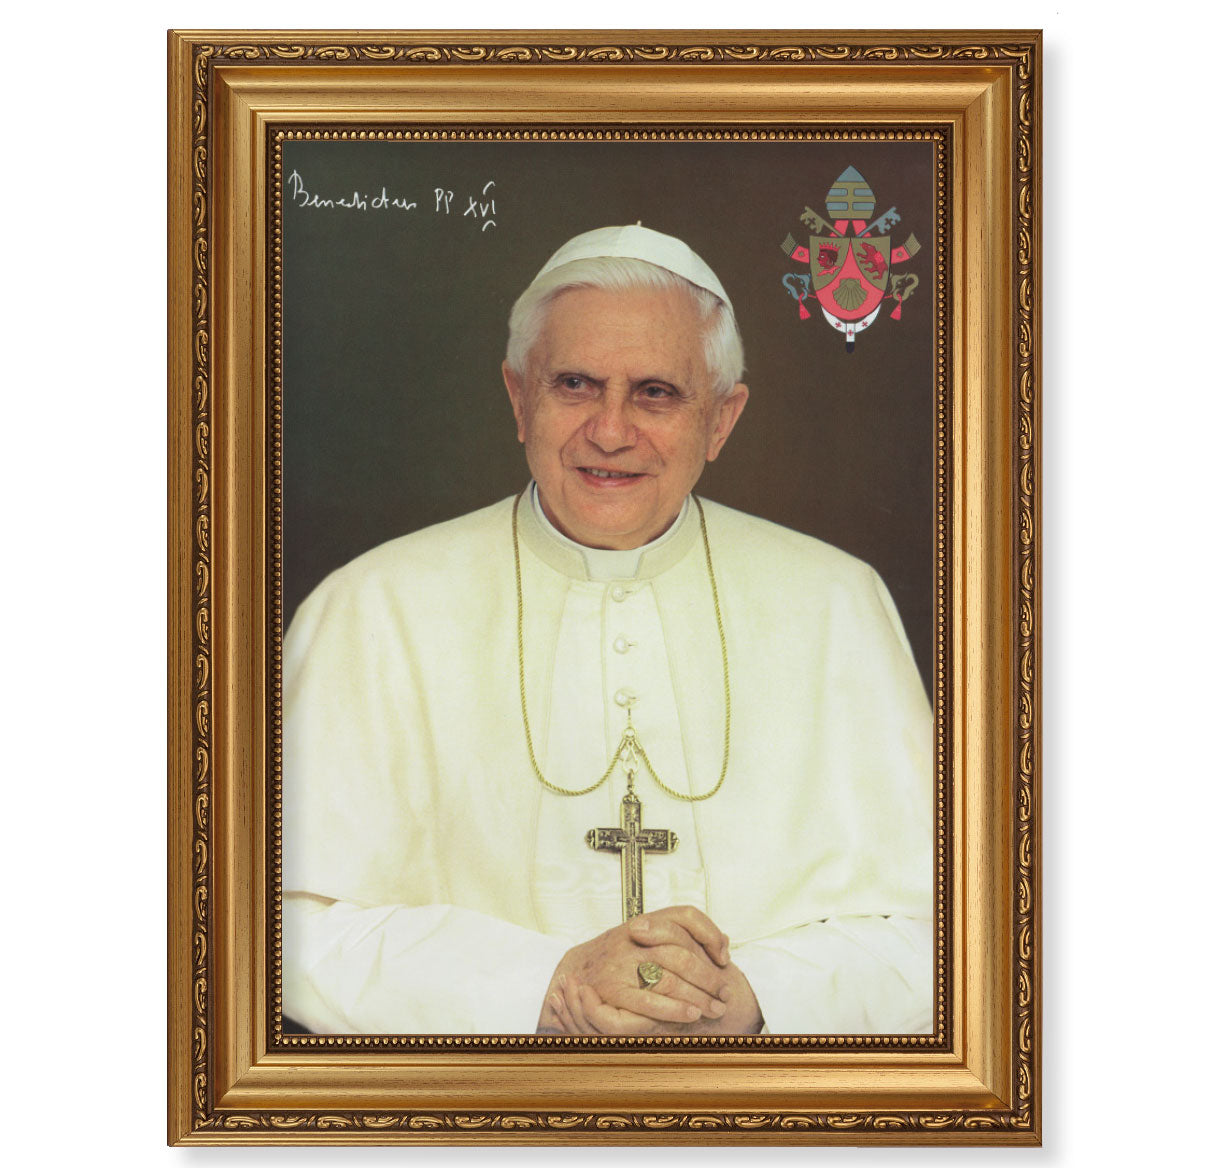 Pope Benedict XVI Antique Picture Framed Wall Art Decor Extra Large, Antique Gold-Leaf Frame with Acanthus-Leaf Trim and Beaded Lip